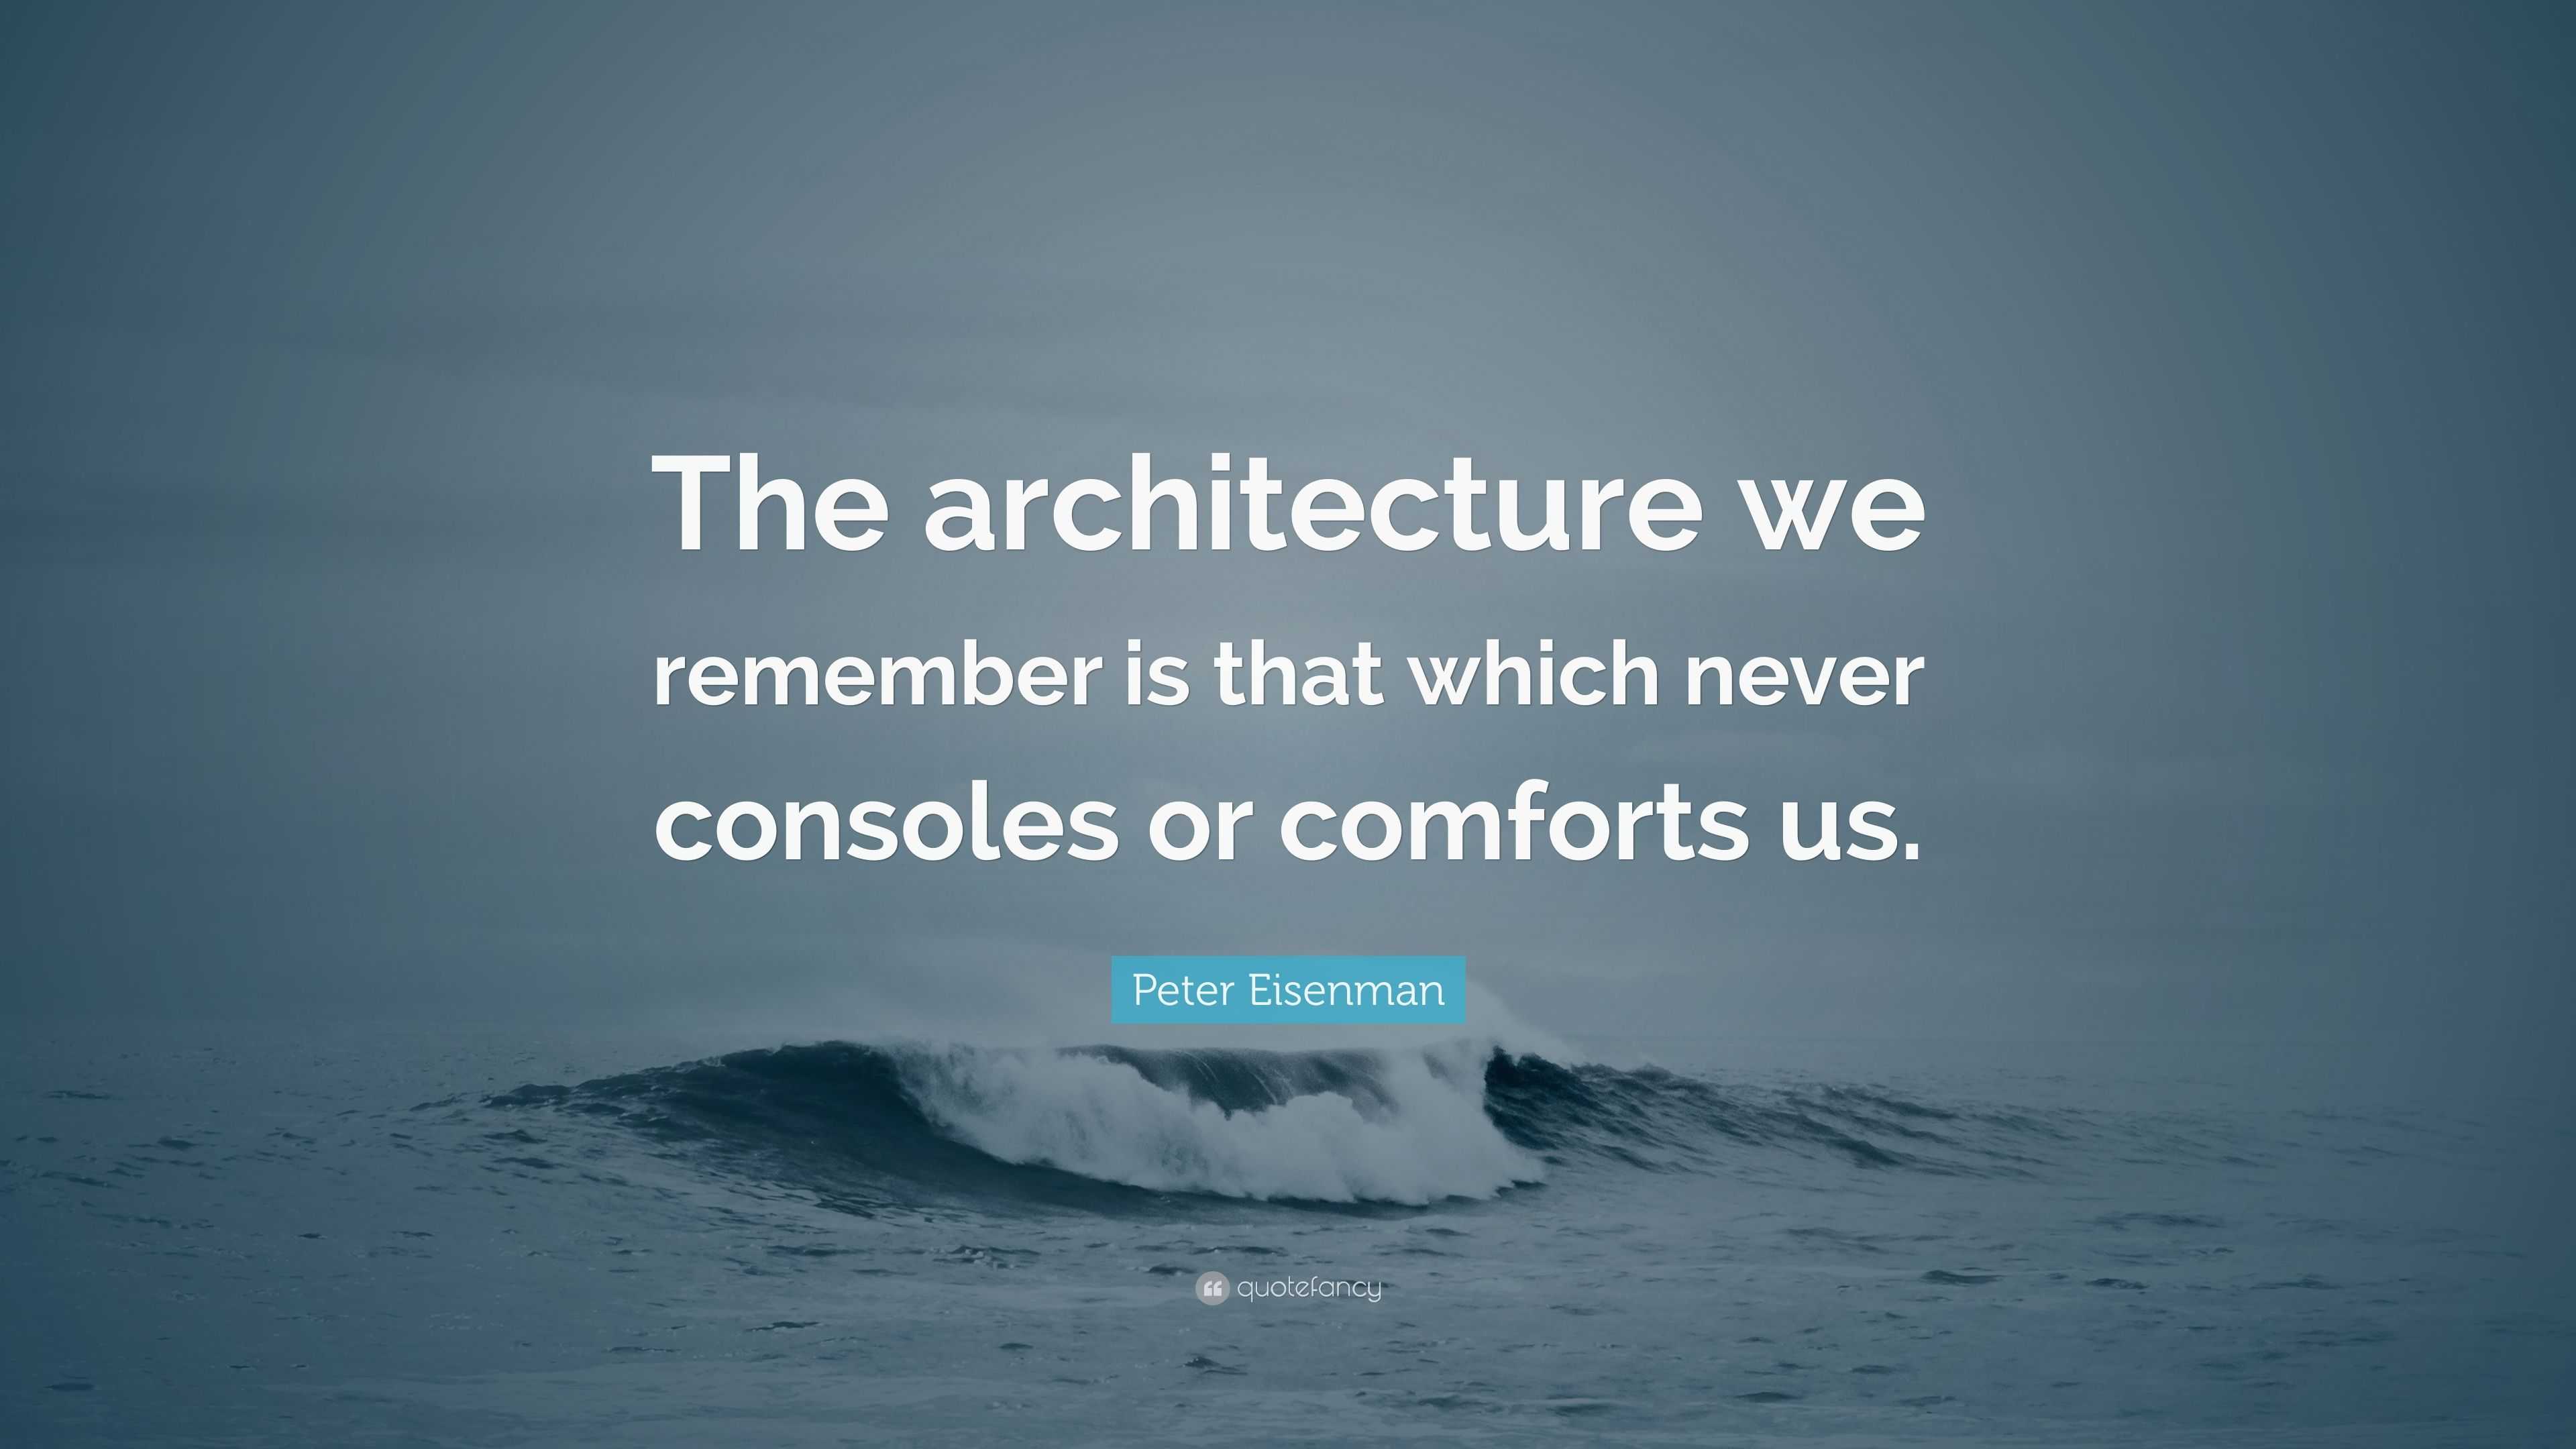 Peter Eisenman Quote: “The architecture we remember is that which never ...